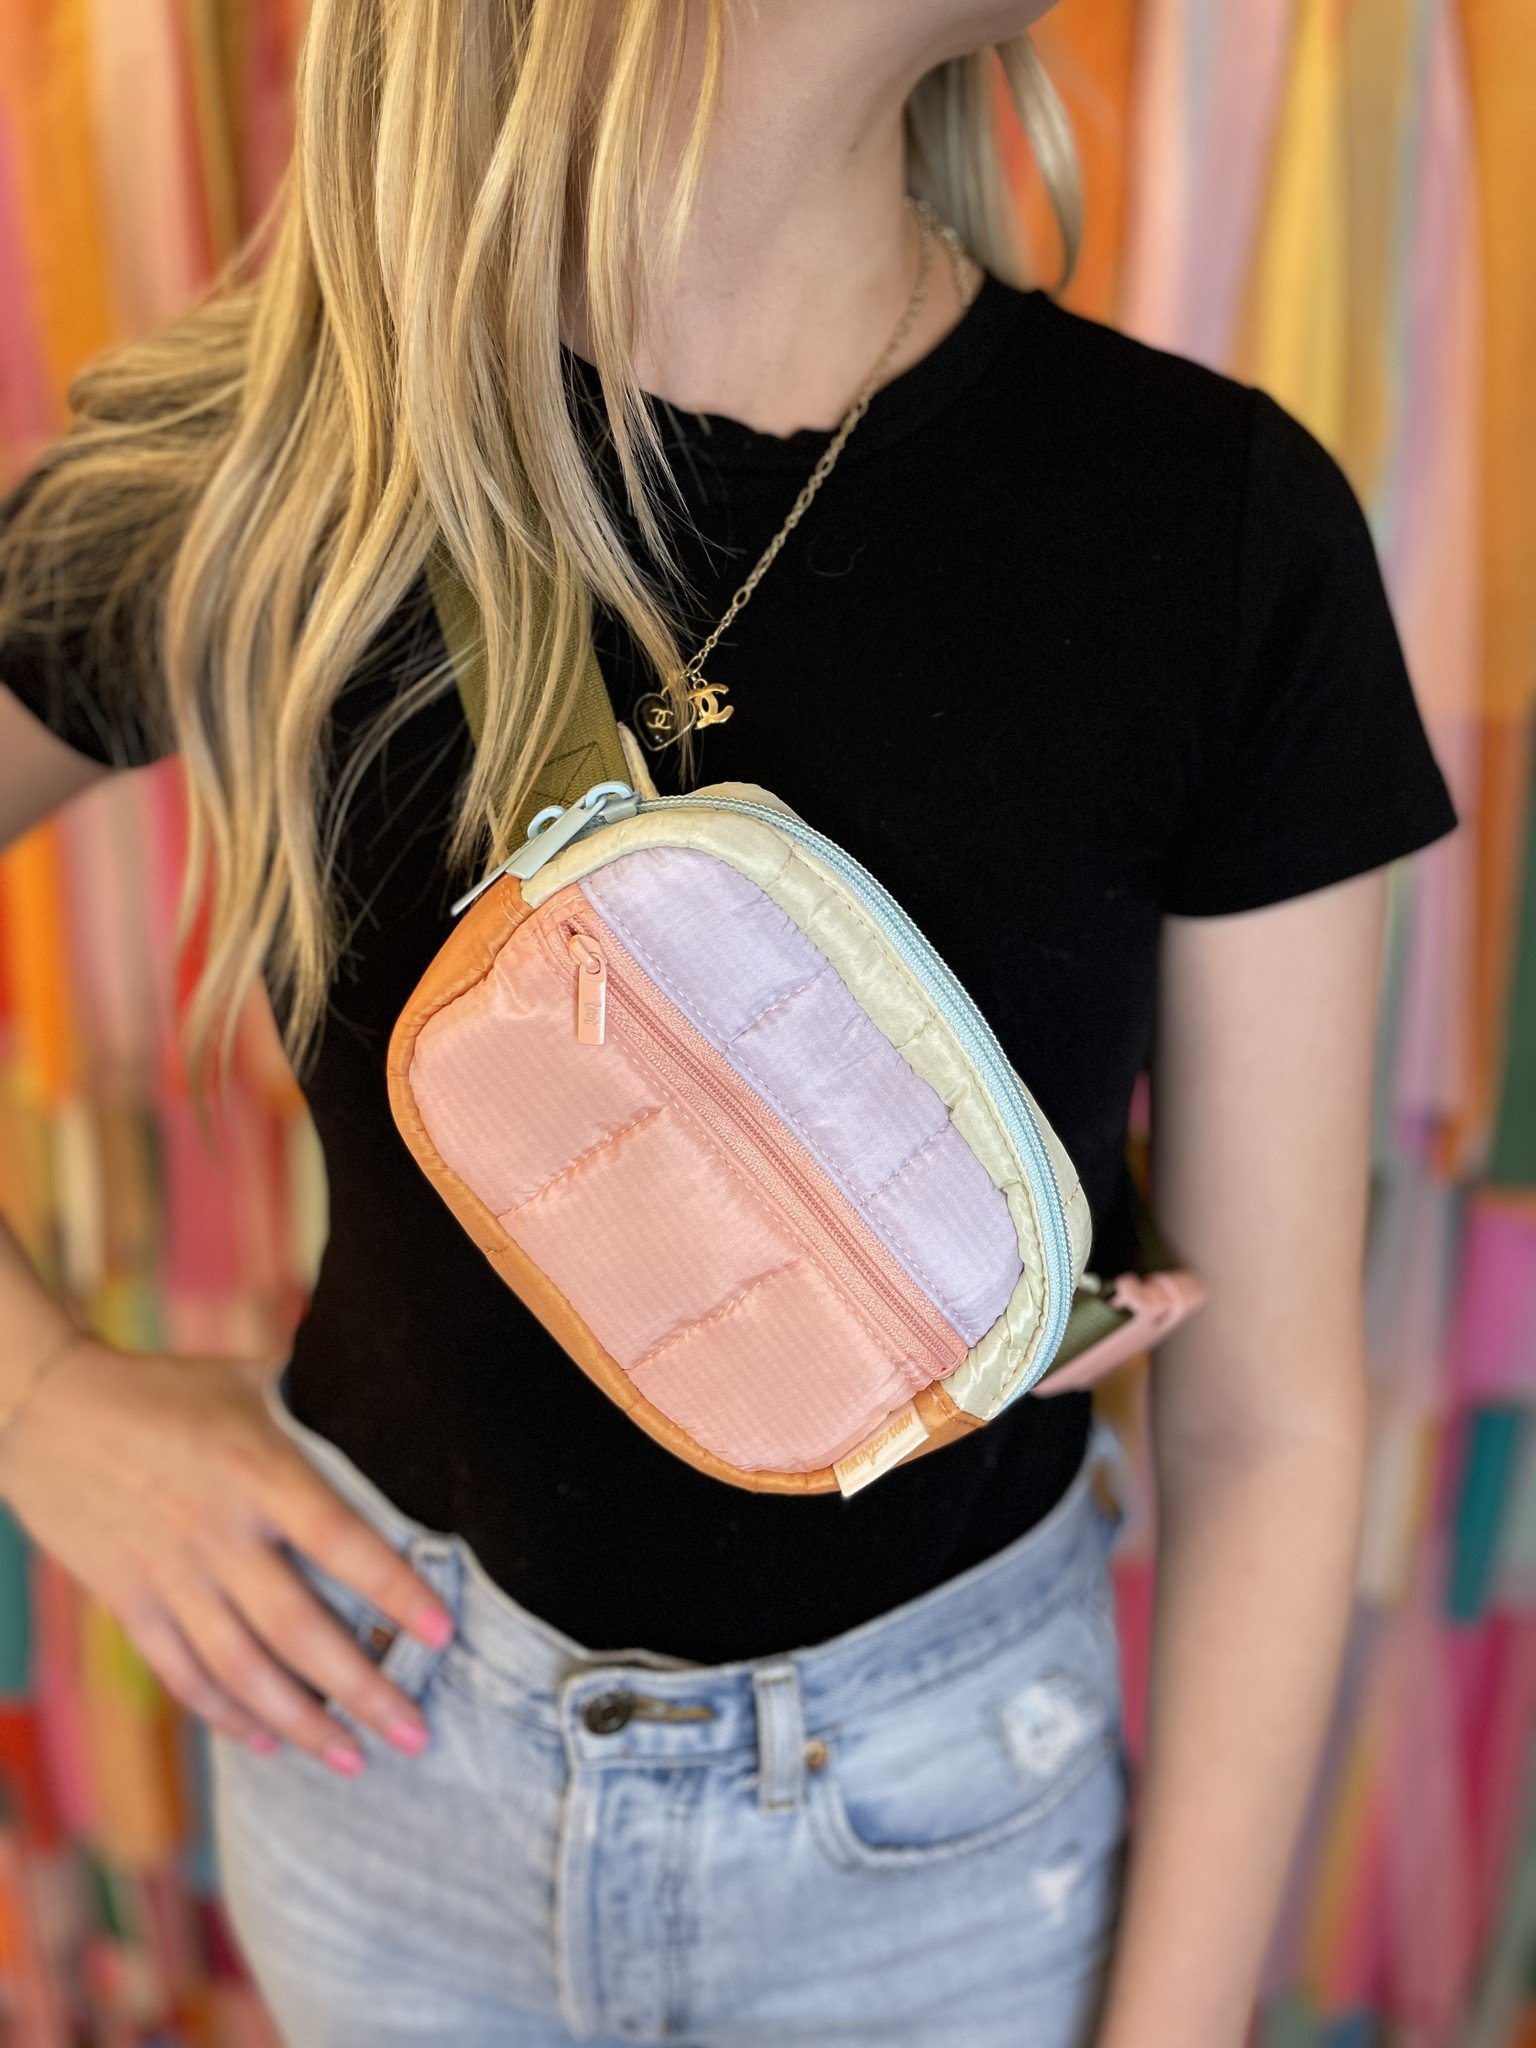 Candy Block Puffy Small Hip Bag